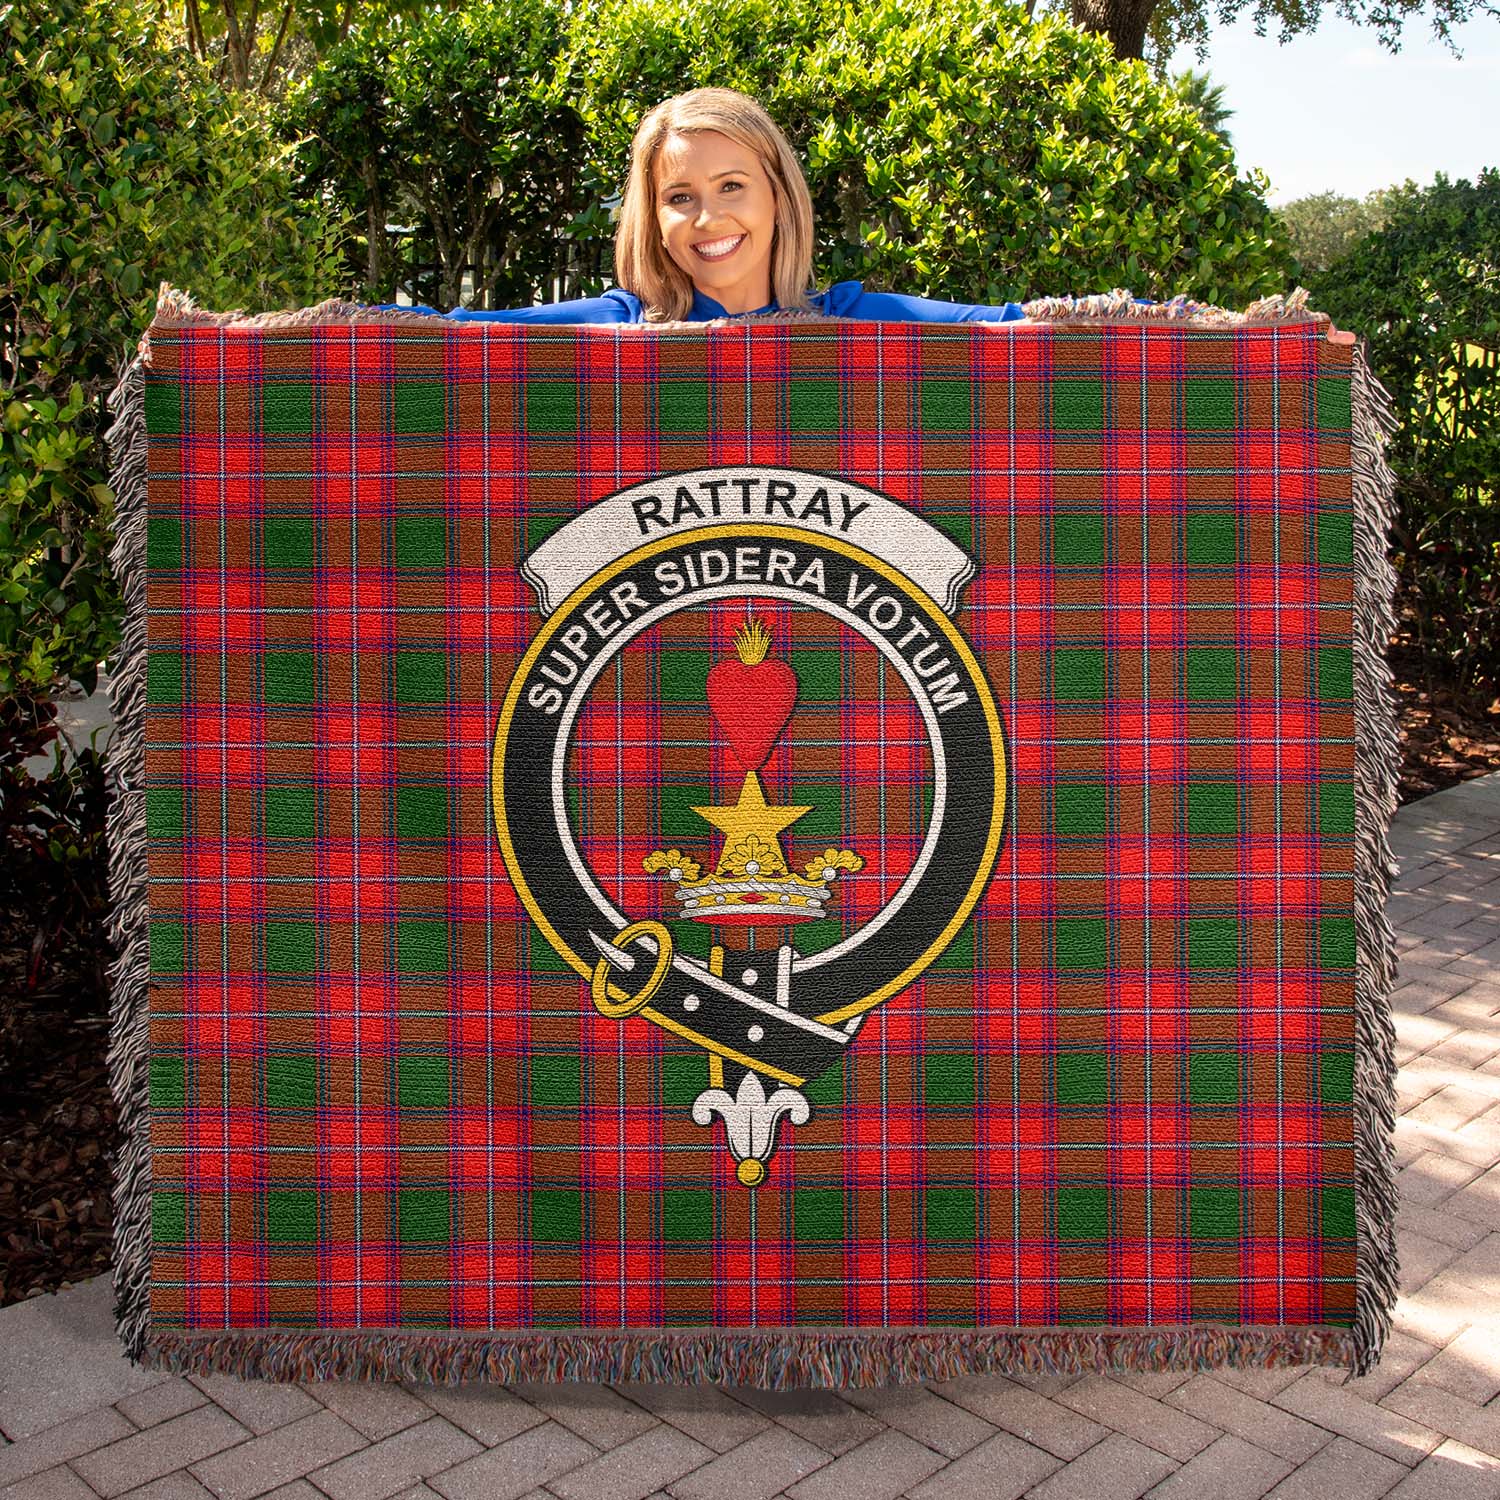 Tartan Vibes Clothing Rattray Modern Tartan Woven Blanket with Family Crest